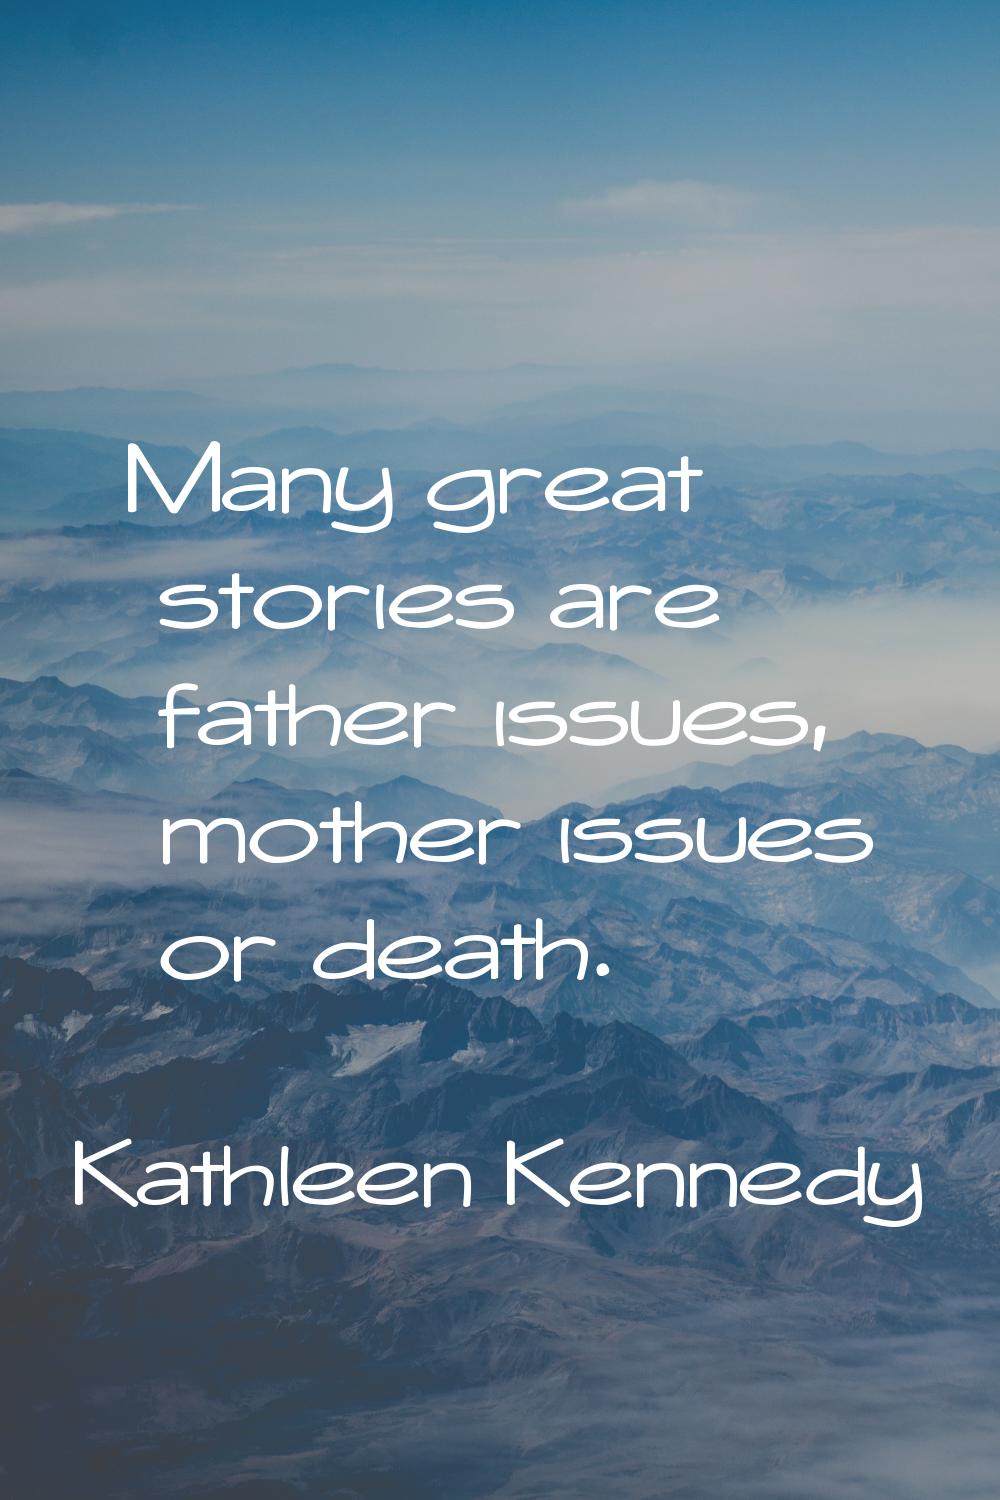 Many great stories are father issues, mother issues or death.